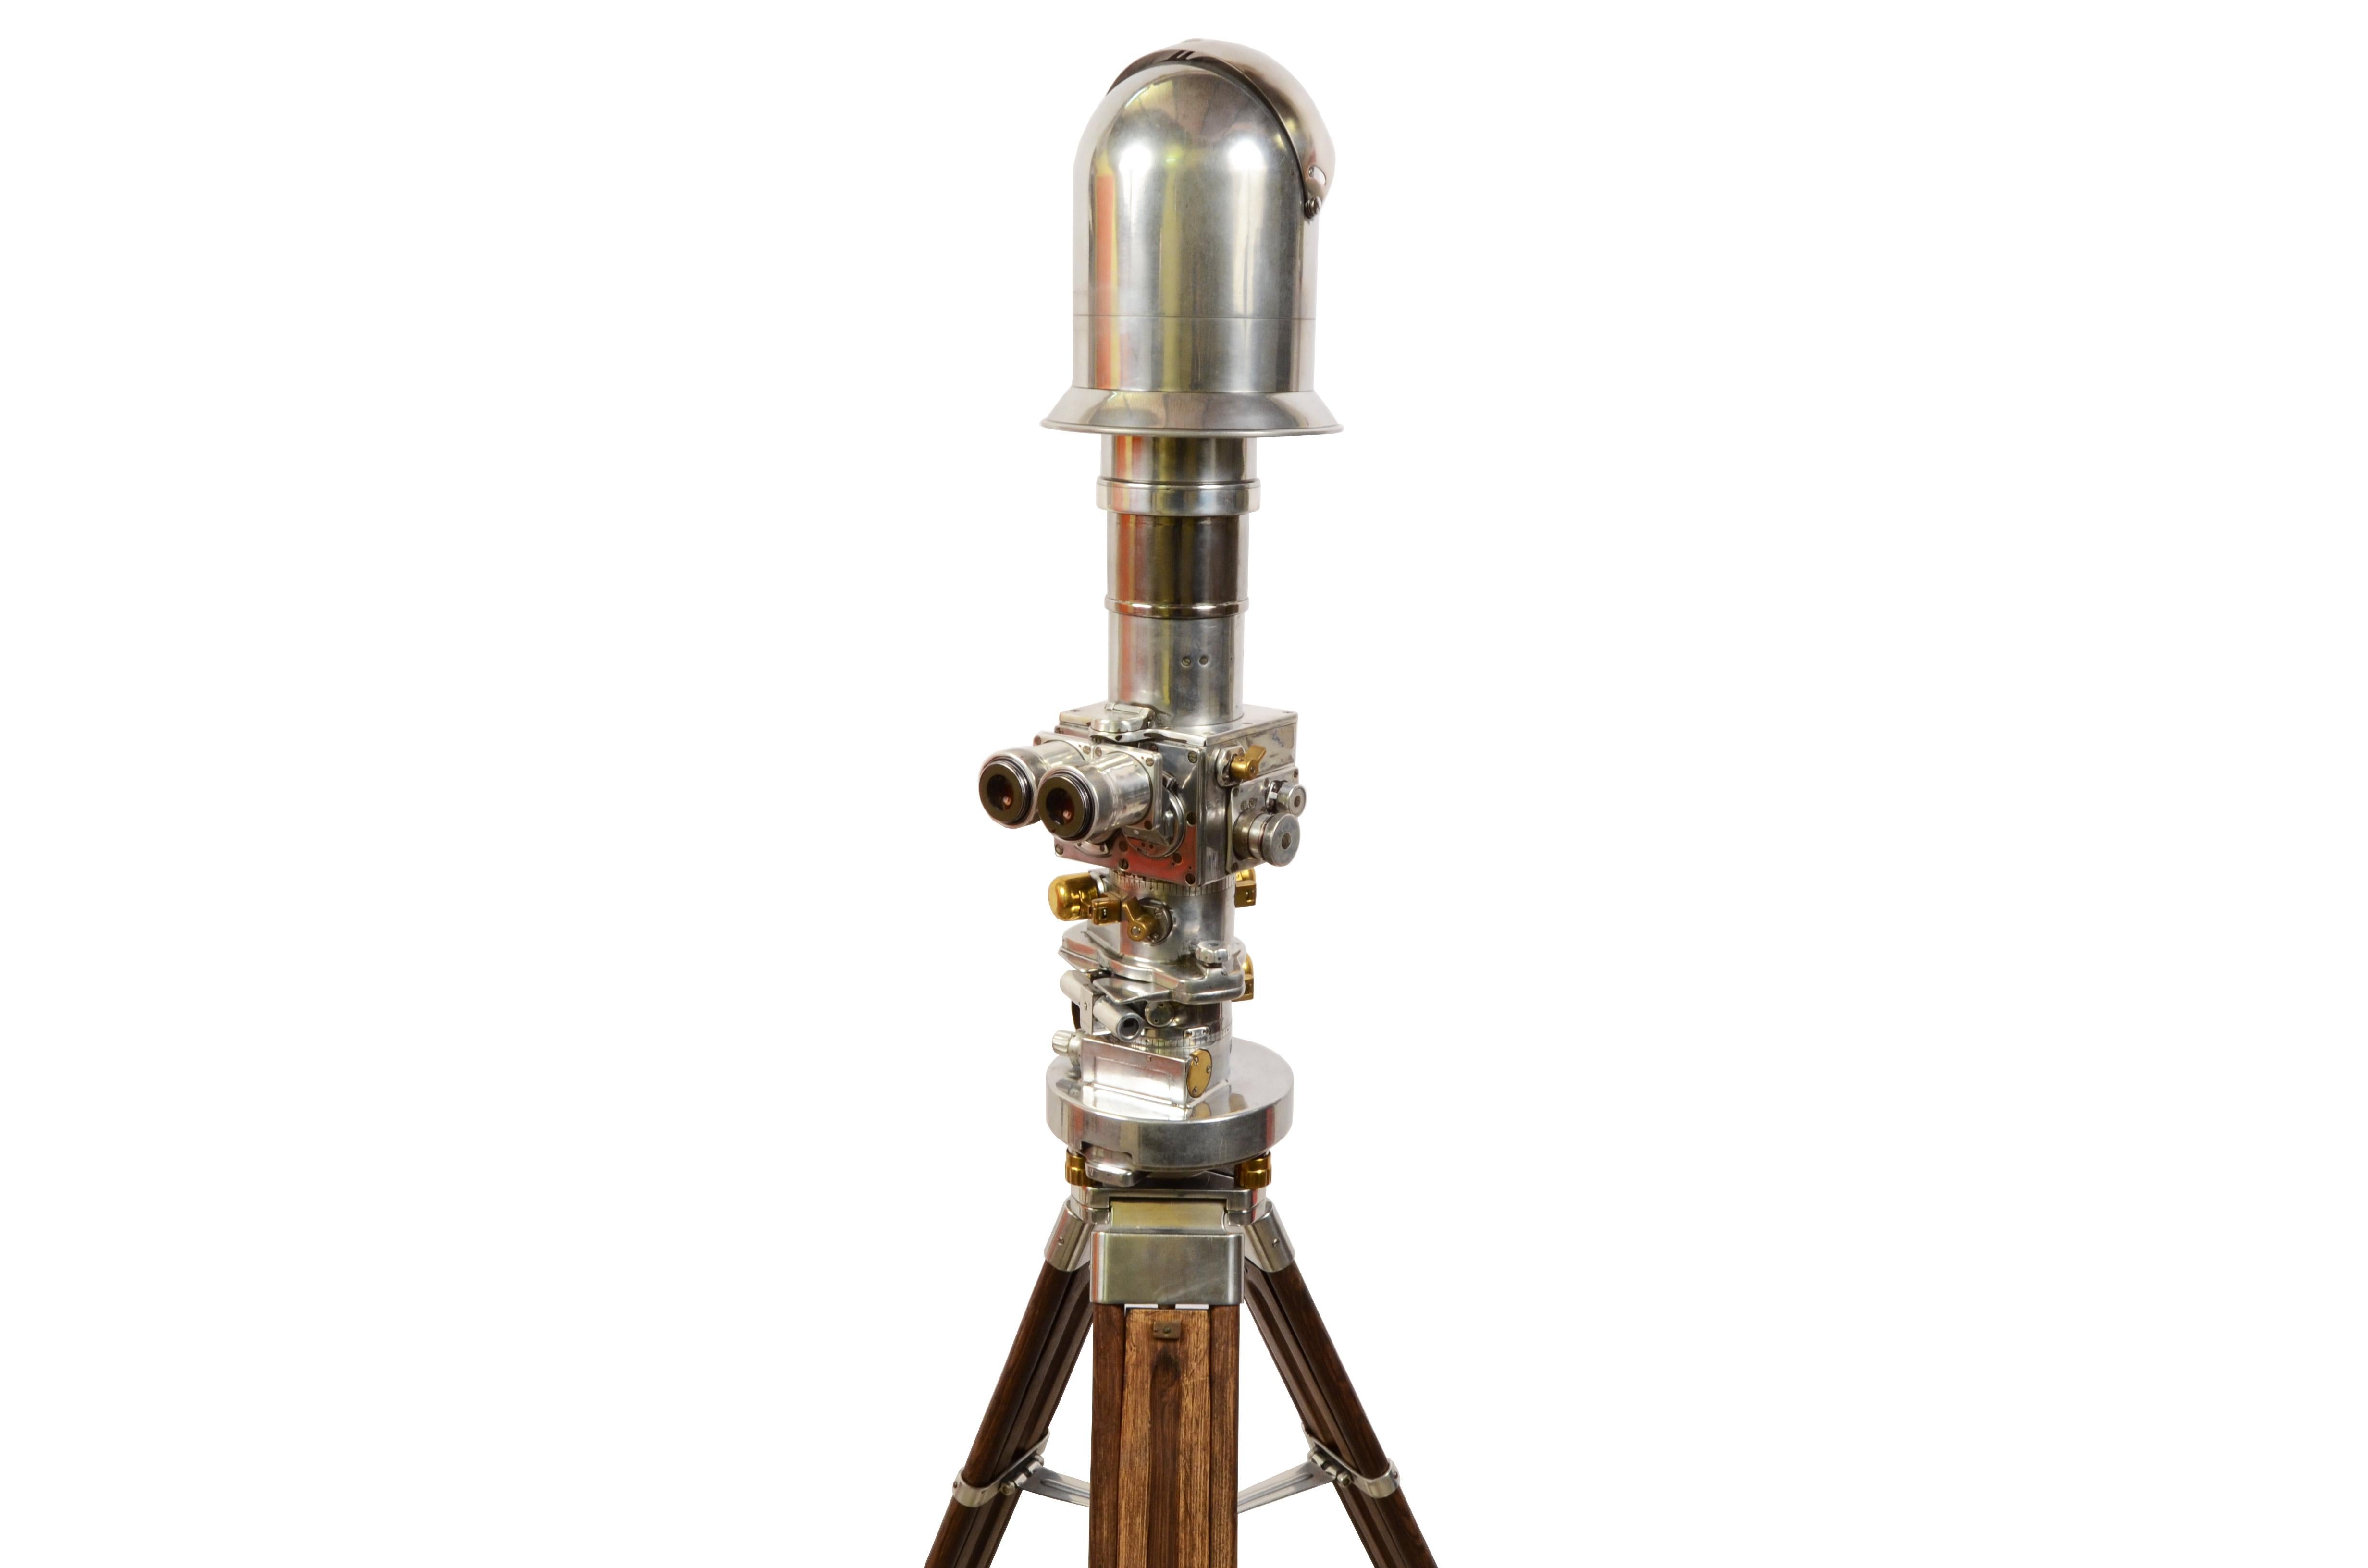 Richtungsweiser-Doppelfernrohr RWDF binocular periscope in brushed and polished aluminum, Carl Zeiss 10x50 lenses and objectives. Made in the 1950s during the Cold War period in West Germany. Complete with height-adjustable wooden tripod and wooden